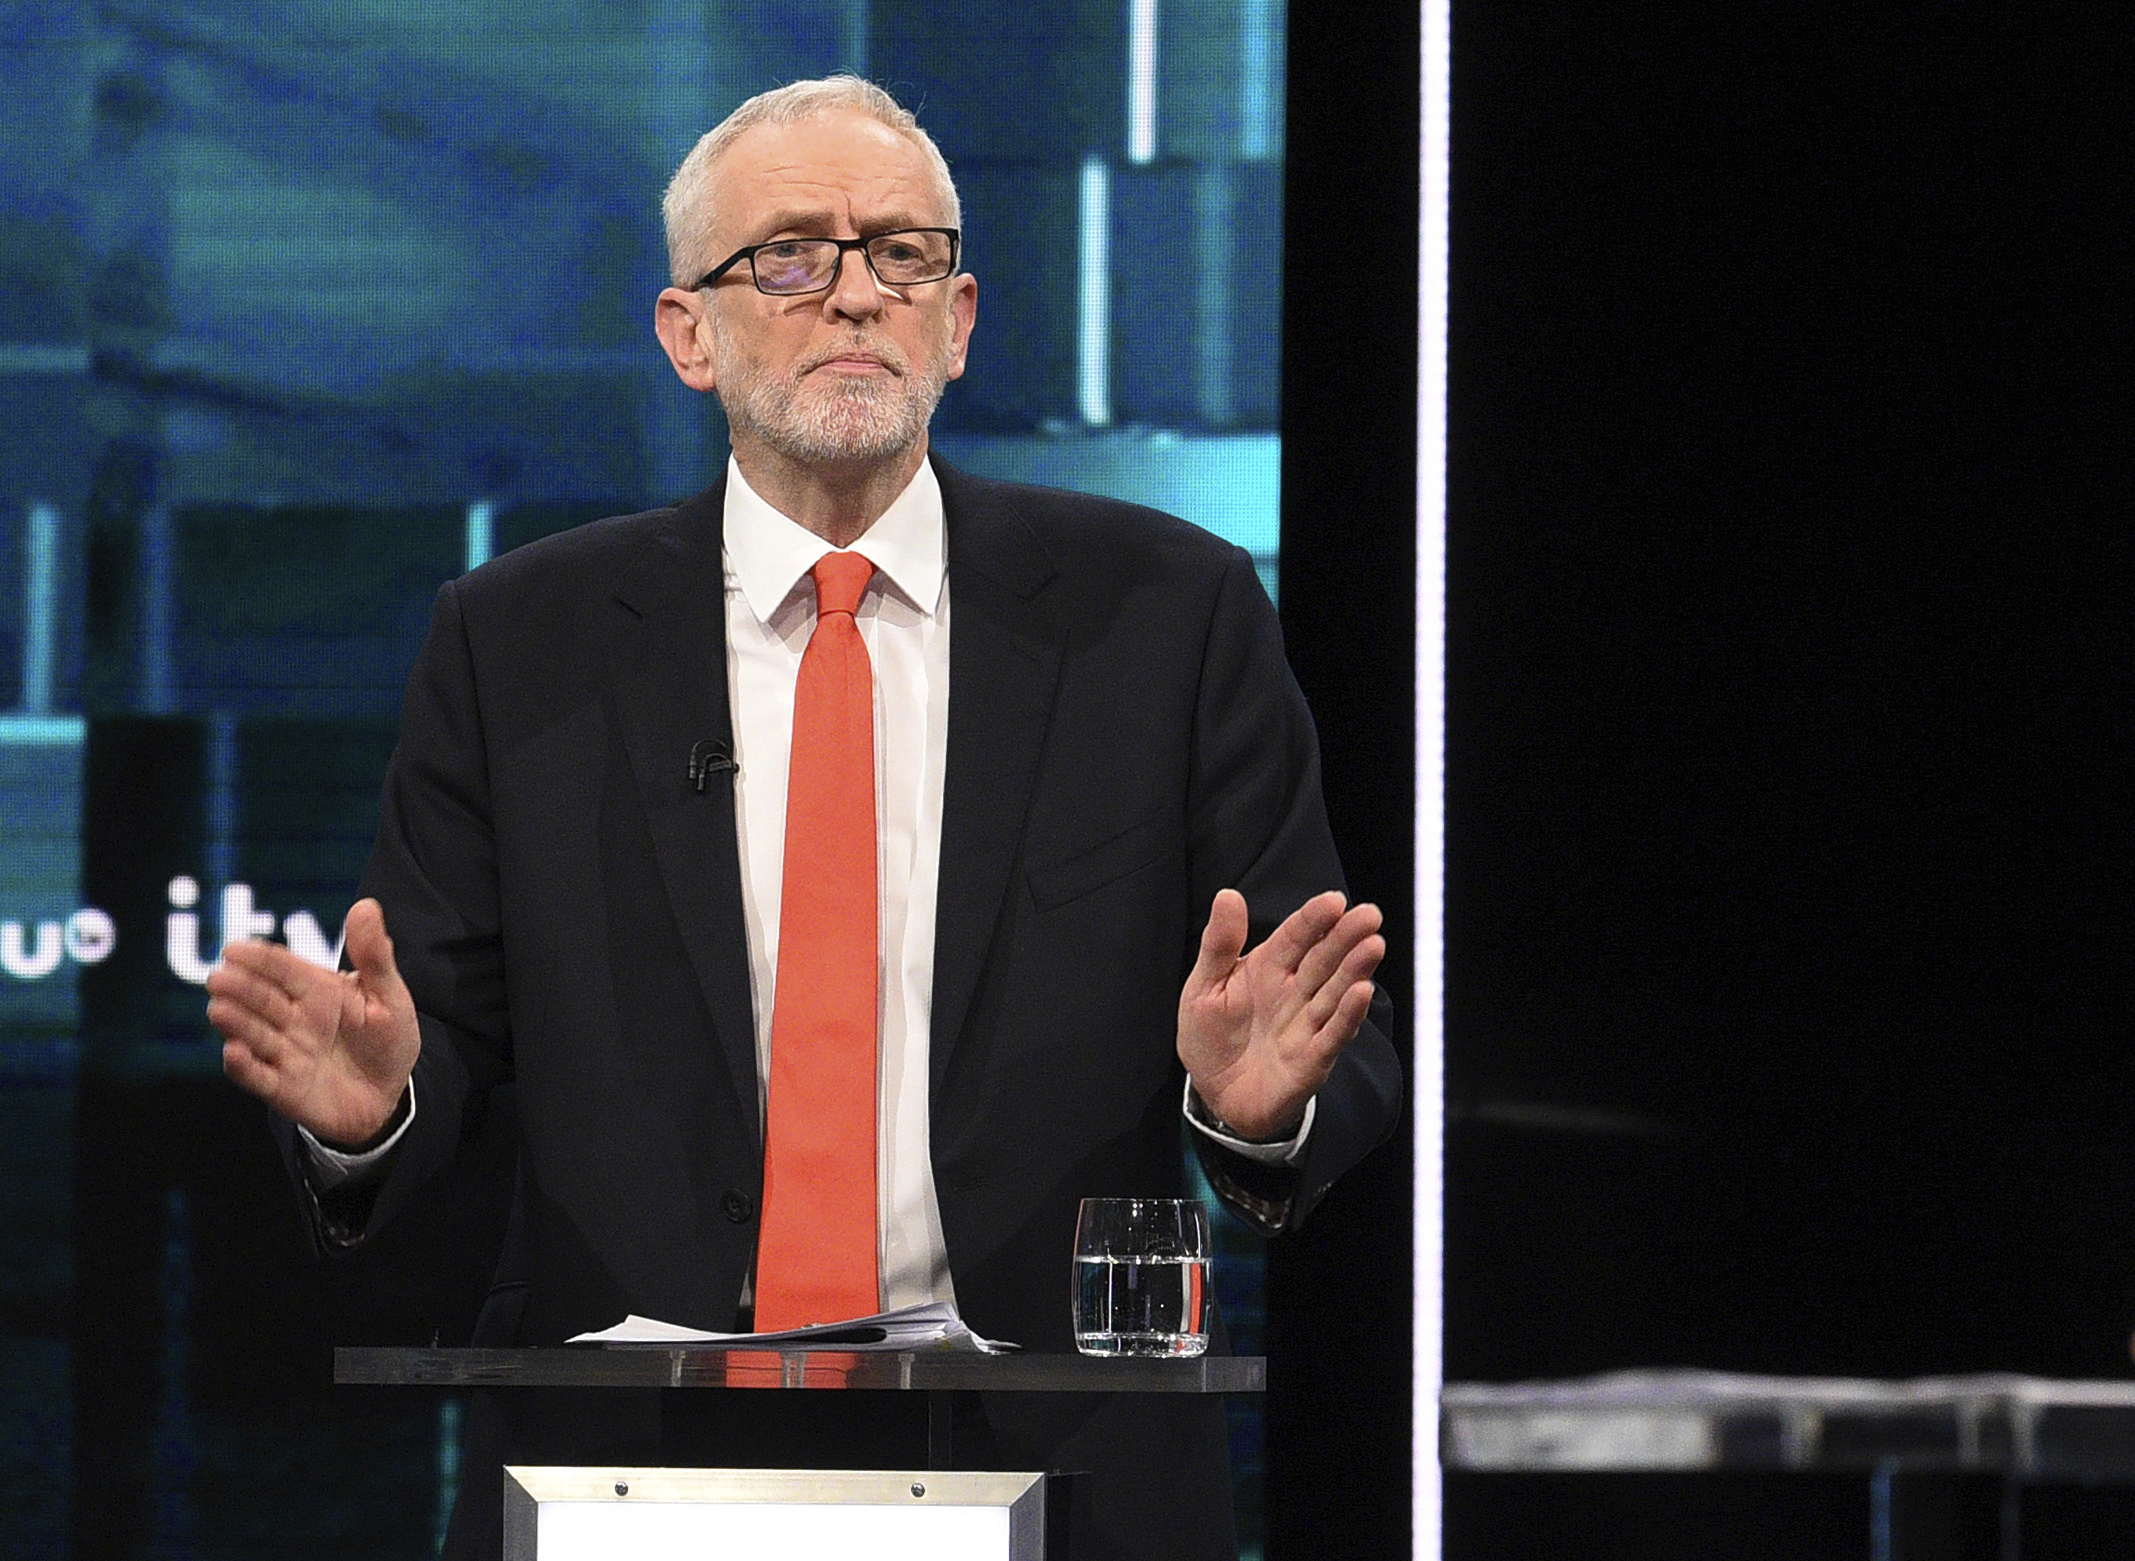 Jeremy Corbyn reacts during the election head-to-head debate live on TV in Salford, Manchester on Tuesday.